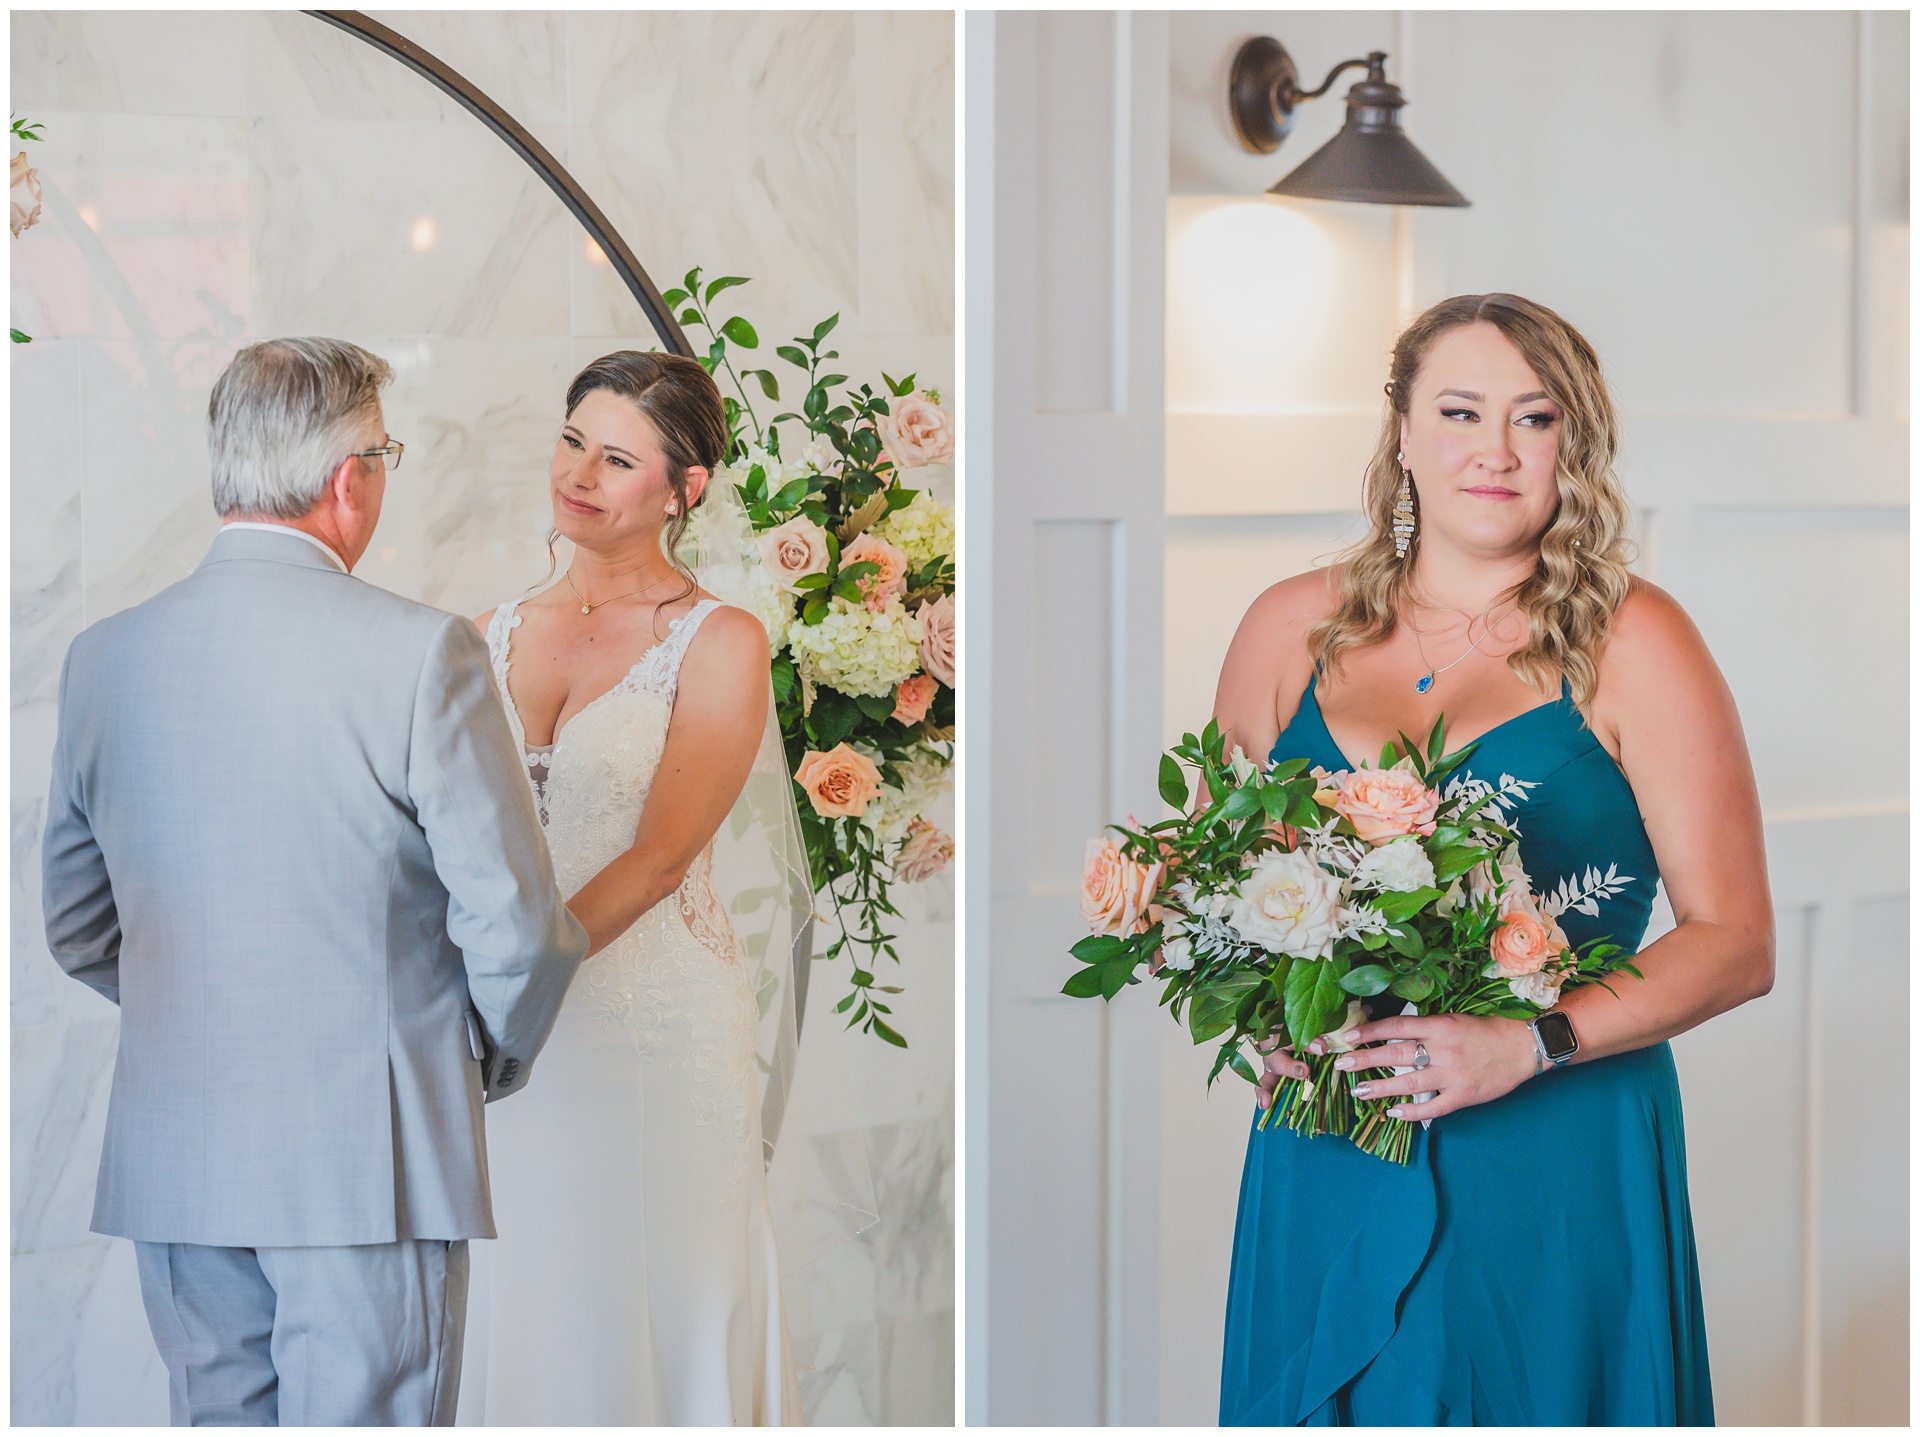 Wedding photography at 28 Event Space by Kansas City wedding photographers Wisdom-Watson Weddings.